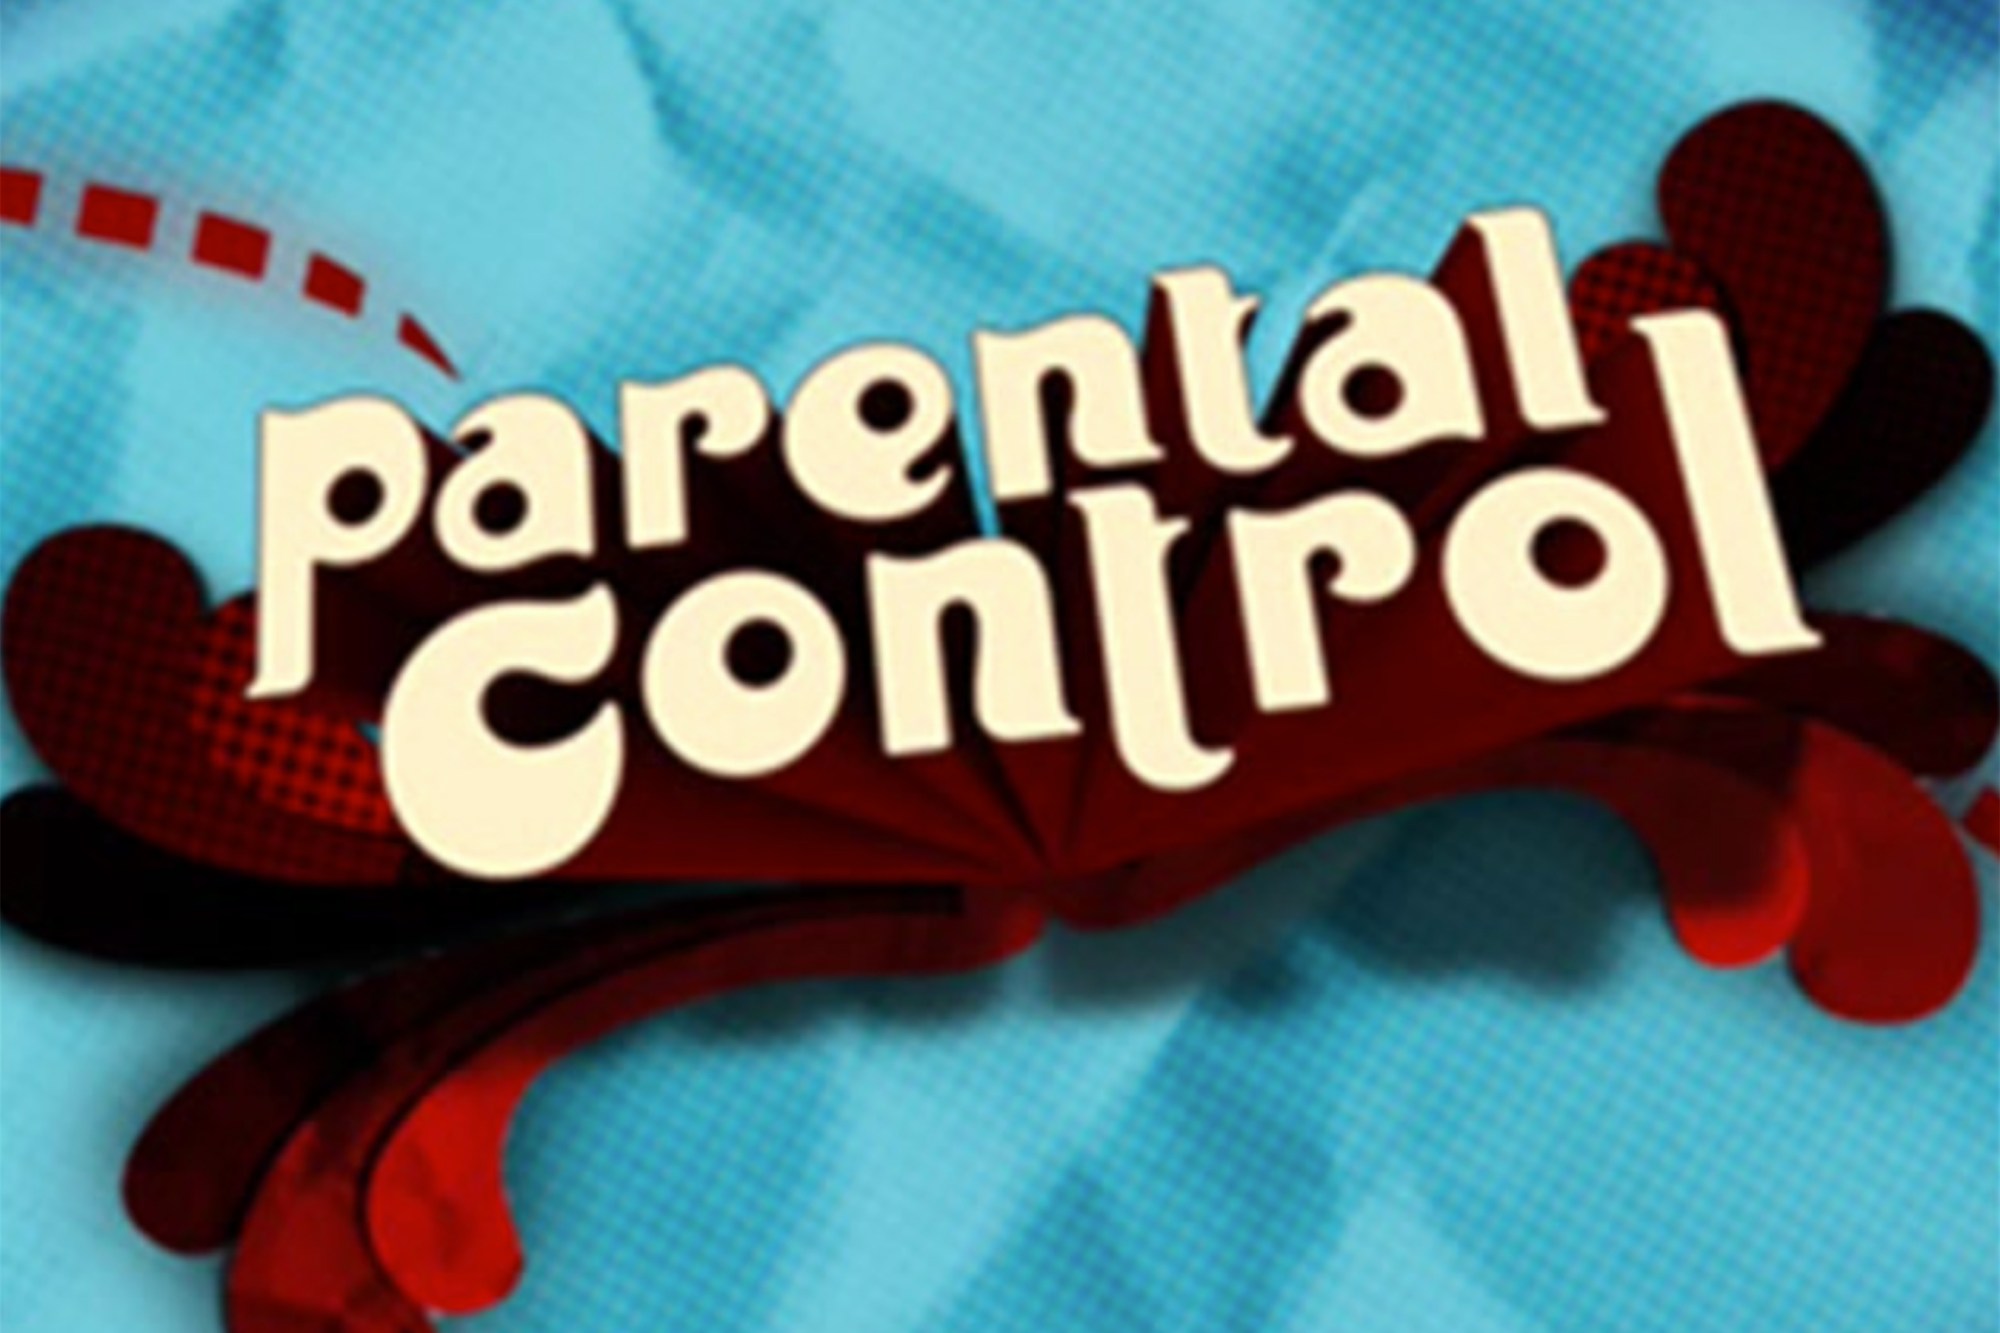 Parental Control MTV Revives Cancelled Comedy Series canceled